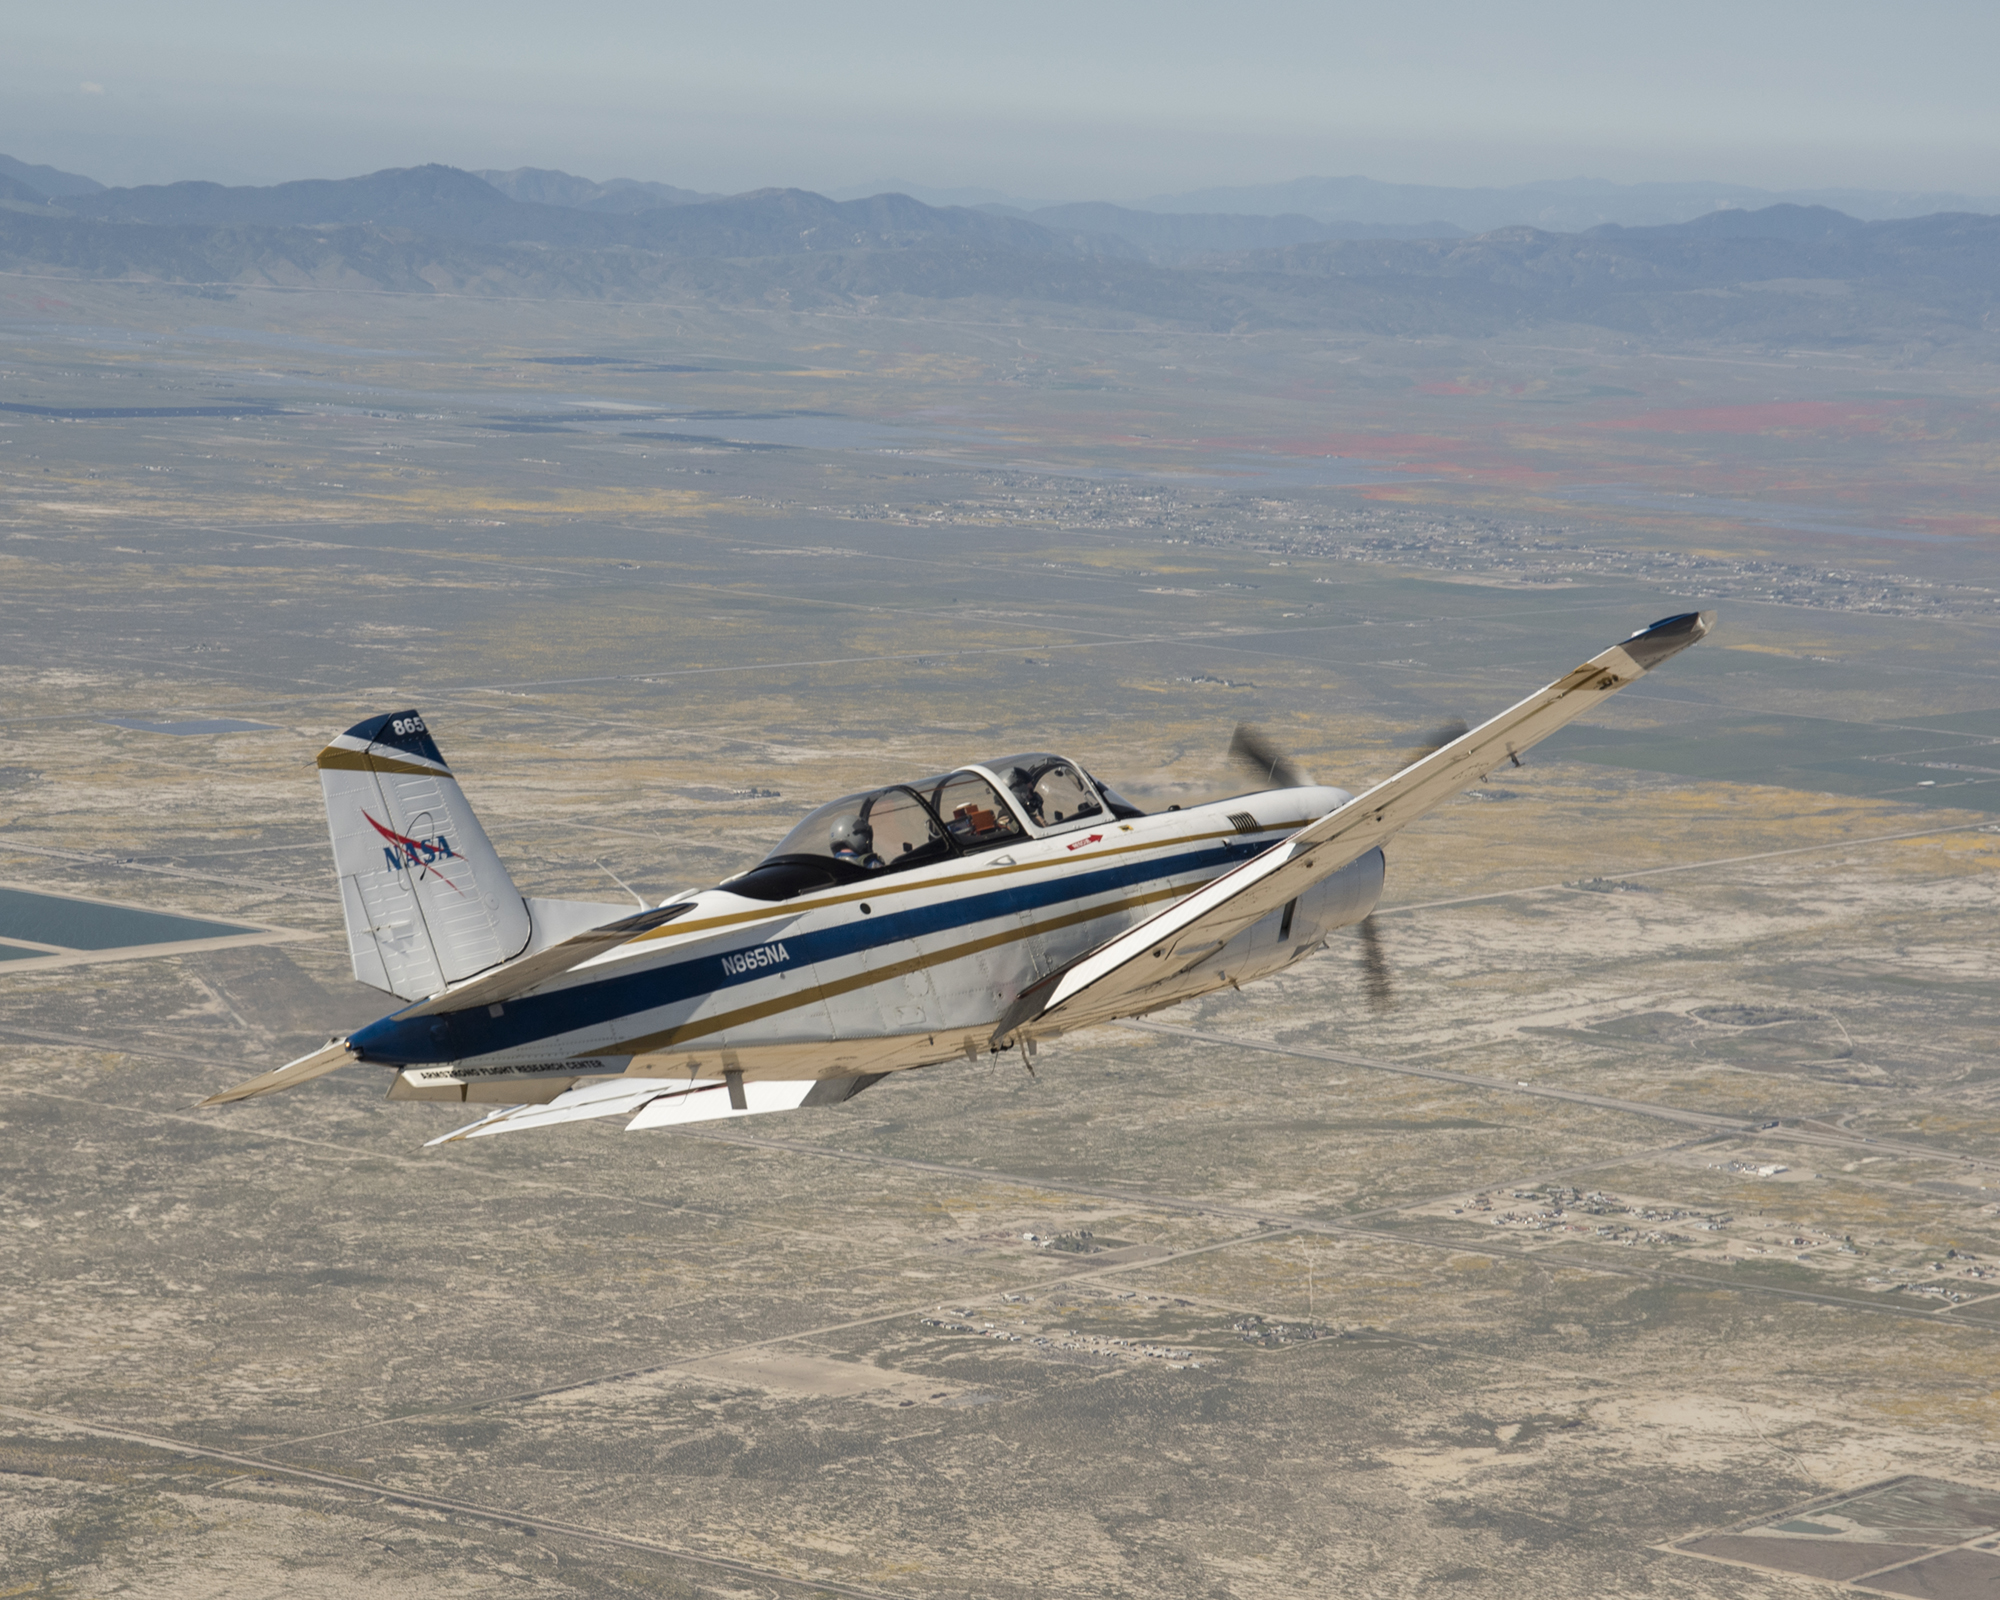 NASA's T-34 aircraft heads toward the Antelope Valley Poppy Reserve in So. Cal.